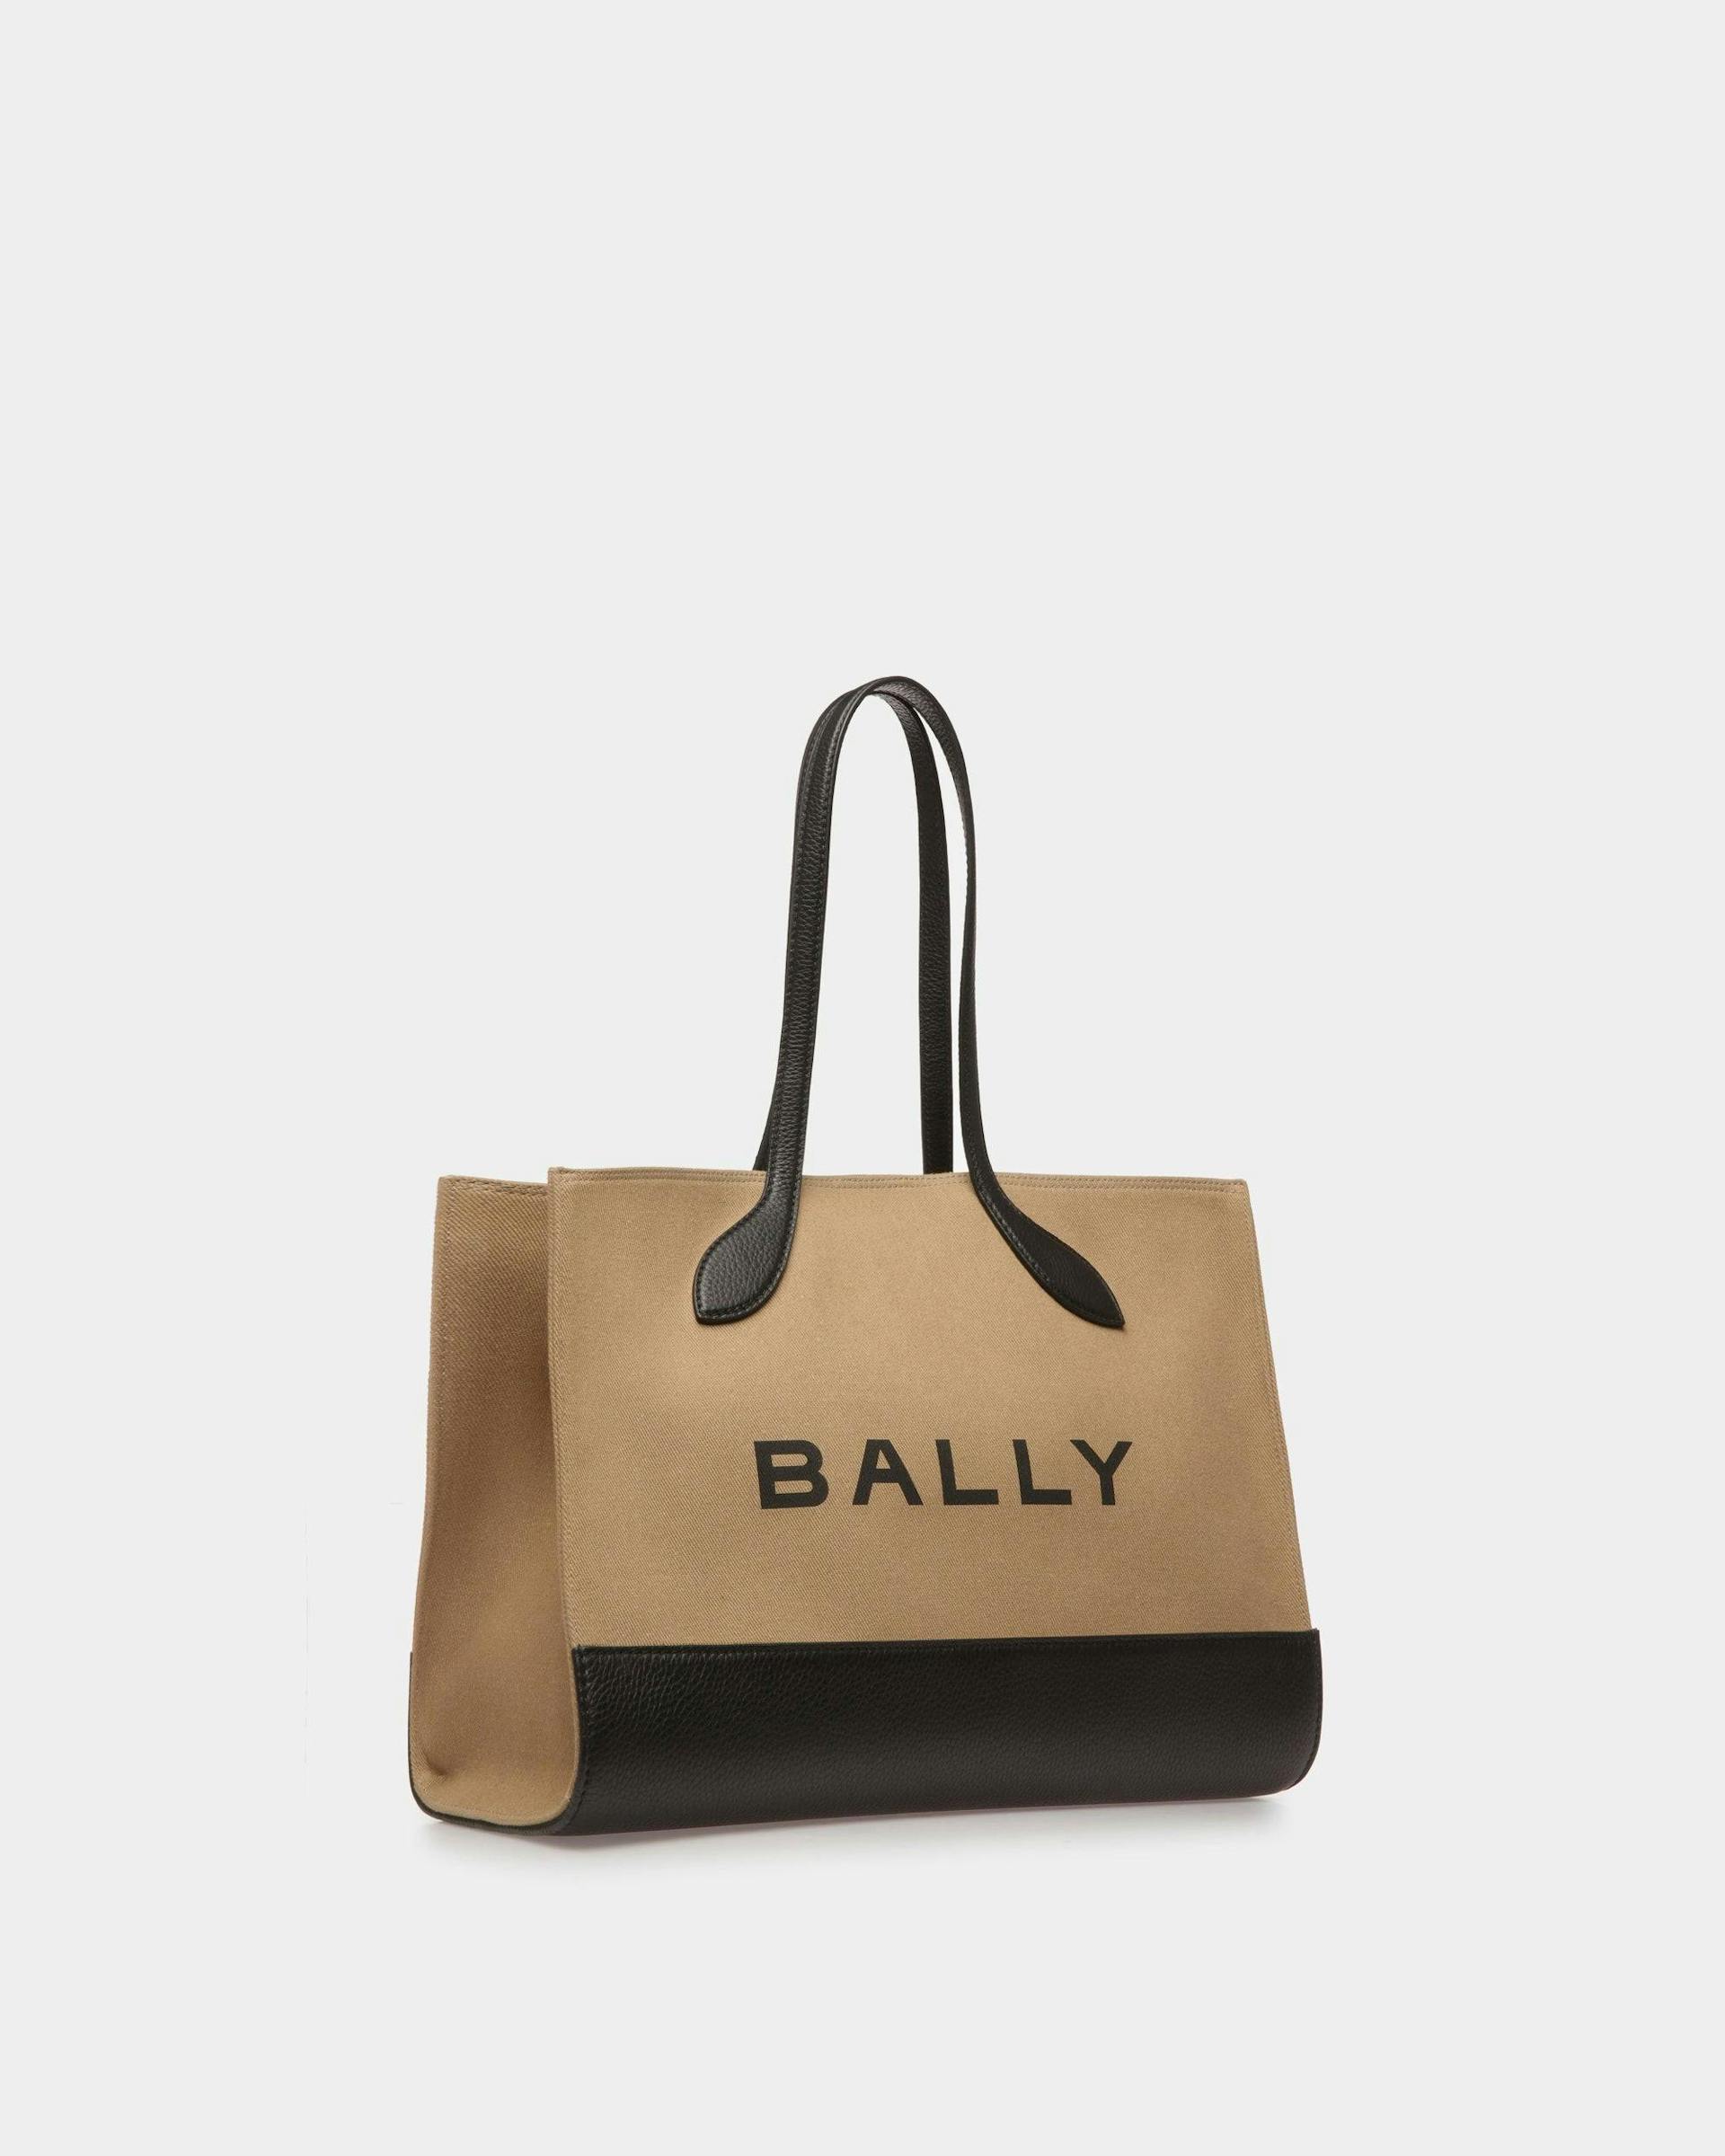 Bar Tote Bag In Sand And Black Fabric - Women's - Bally - 04